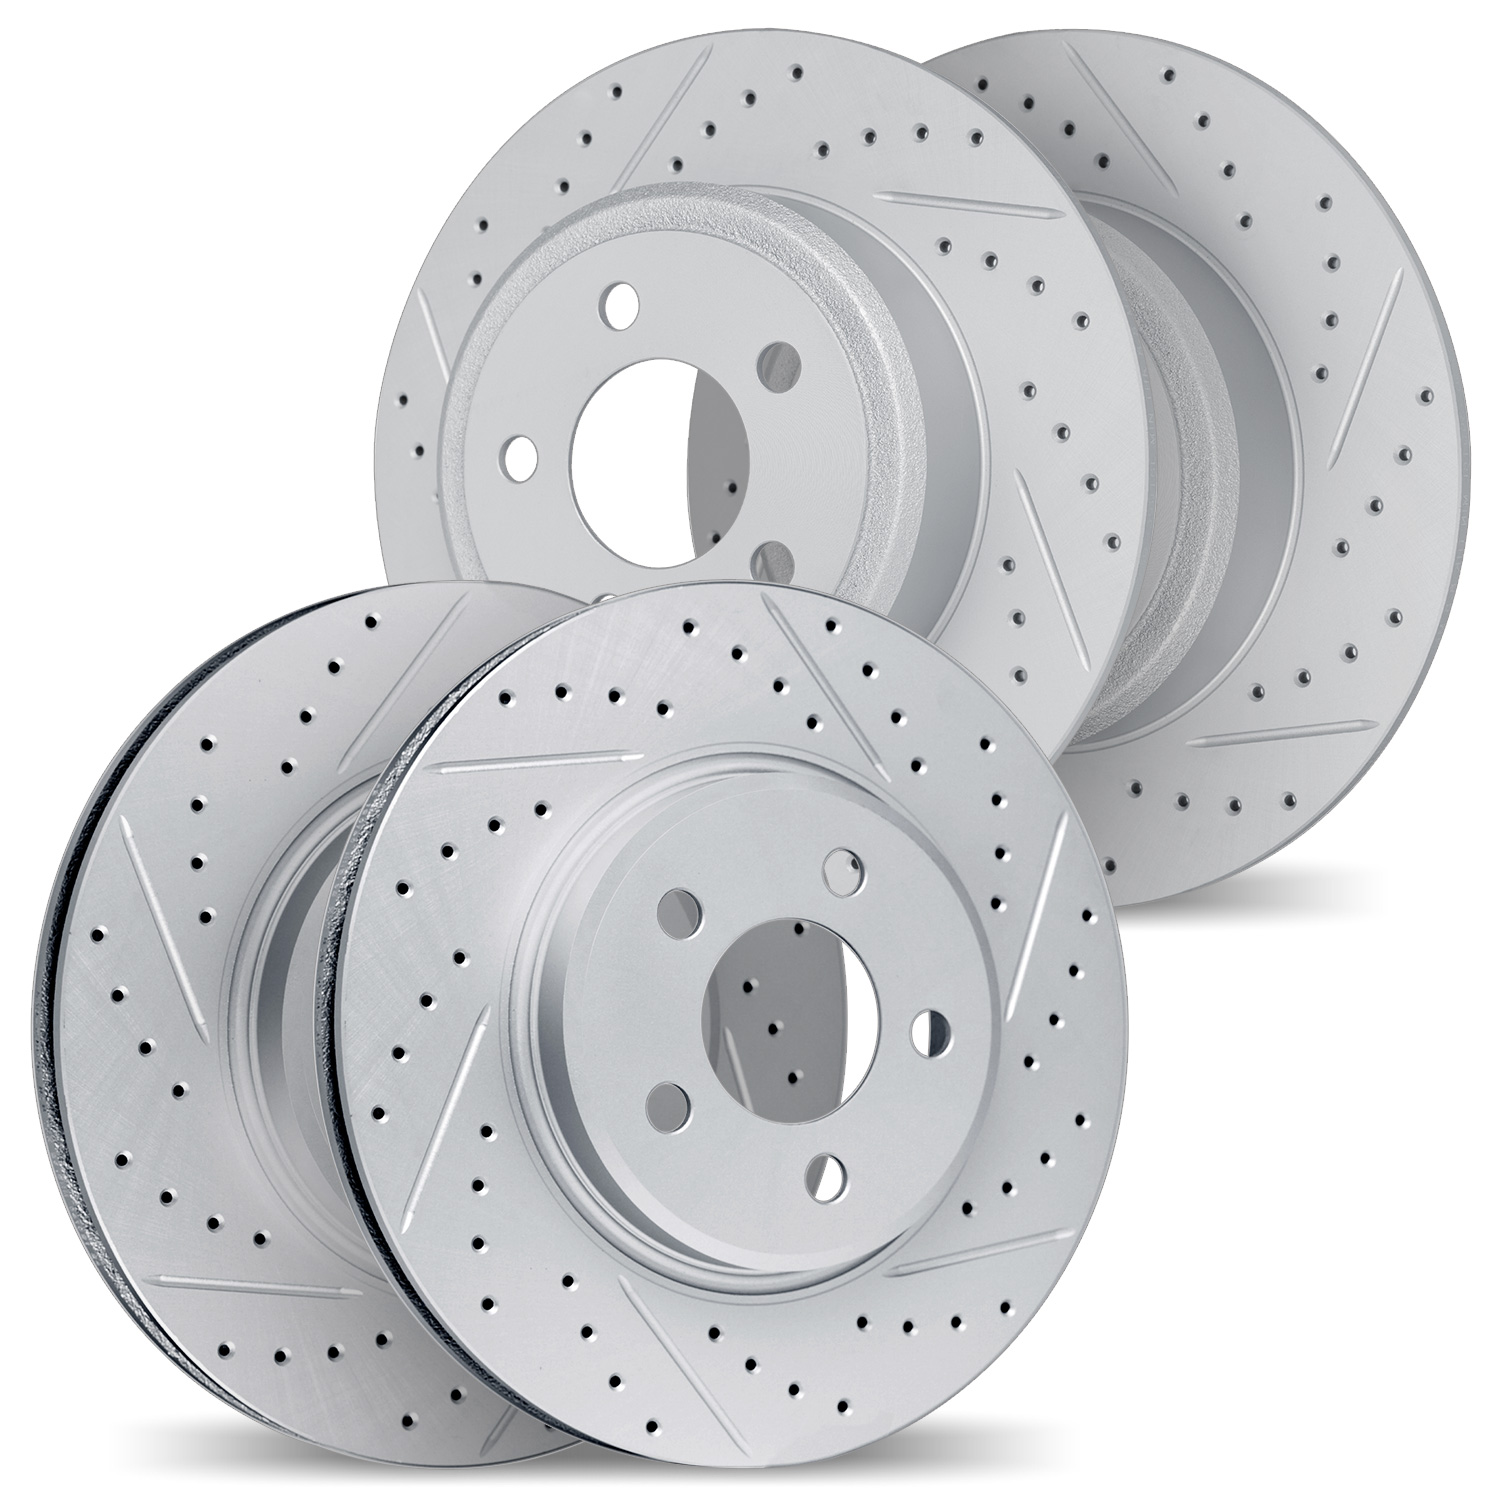 2004-03052 Geoperformance Drilled/Slotted Brake Rotors, Fits Select Kia/Hyundai/Genesis, Position: Front and Rear